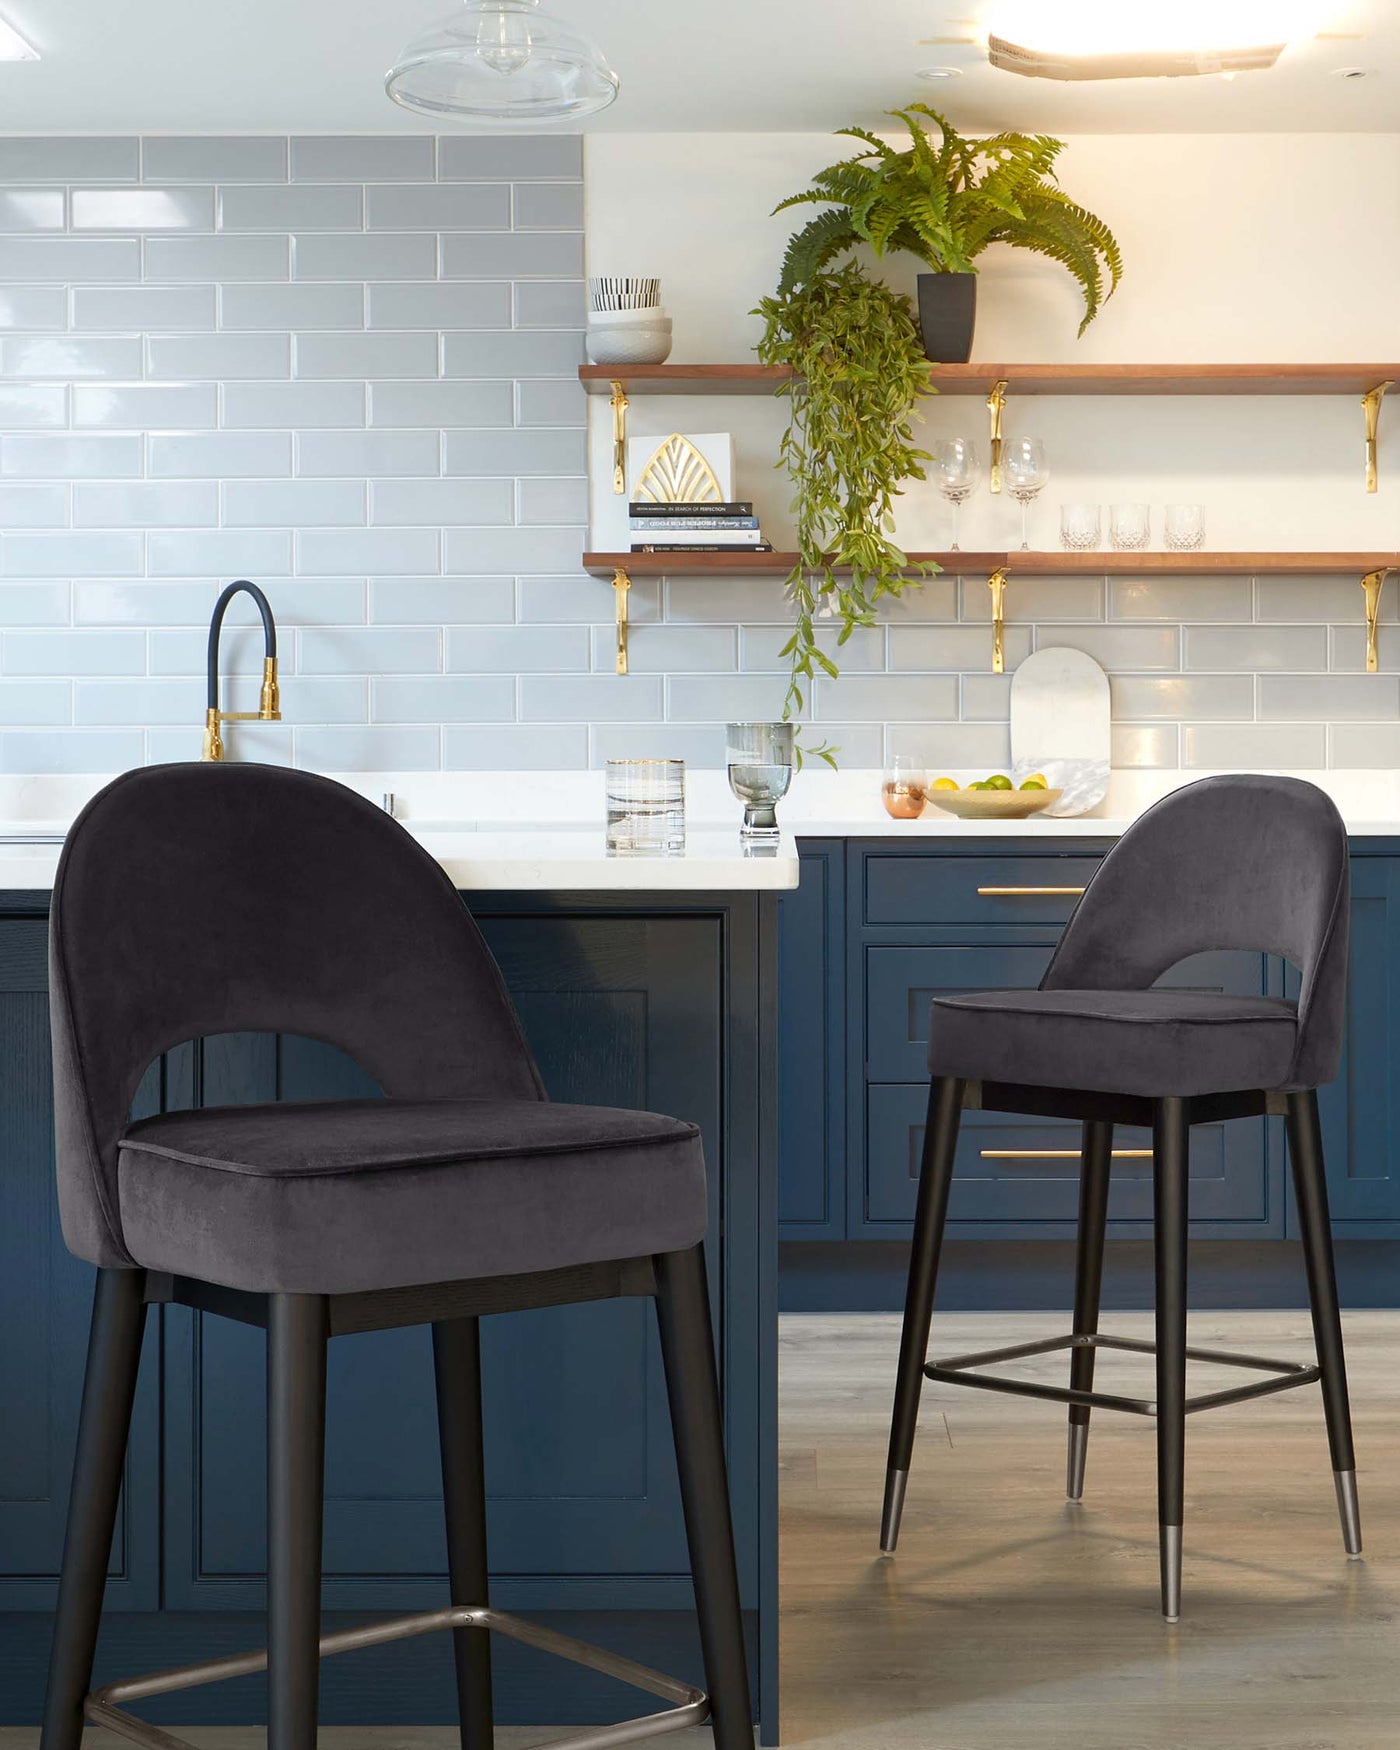 Elegant pair of upholstered bar stools with plush, curved backrests and cushioned seats in a rich, dark grey velvet fabric. The stools stand on sleek, black metal legs with a subtle flare and incorporate a circular, all-around footrest for added comfort. The sophisticated design aligns with a modern kitchen interior, complementing the deep blue cabinetry and warm wooden accents.